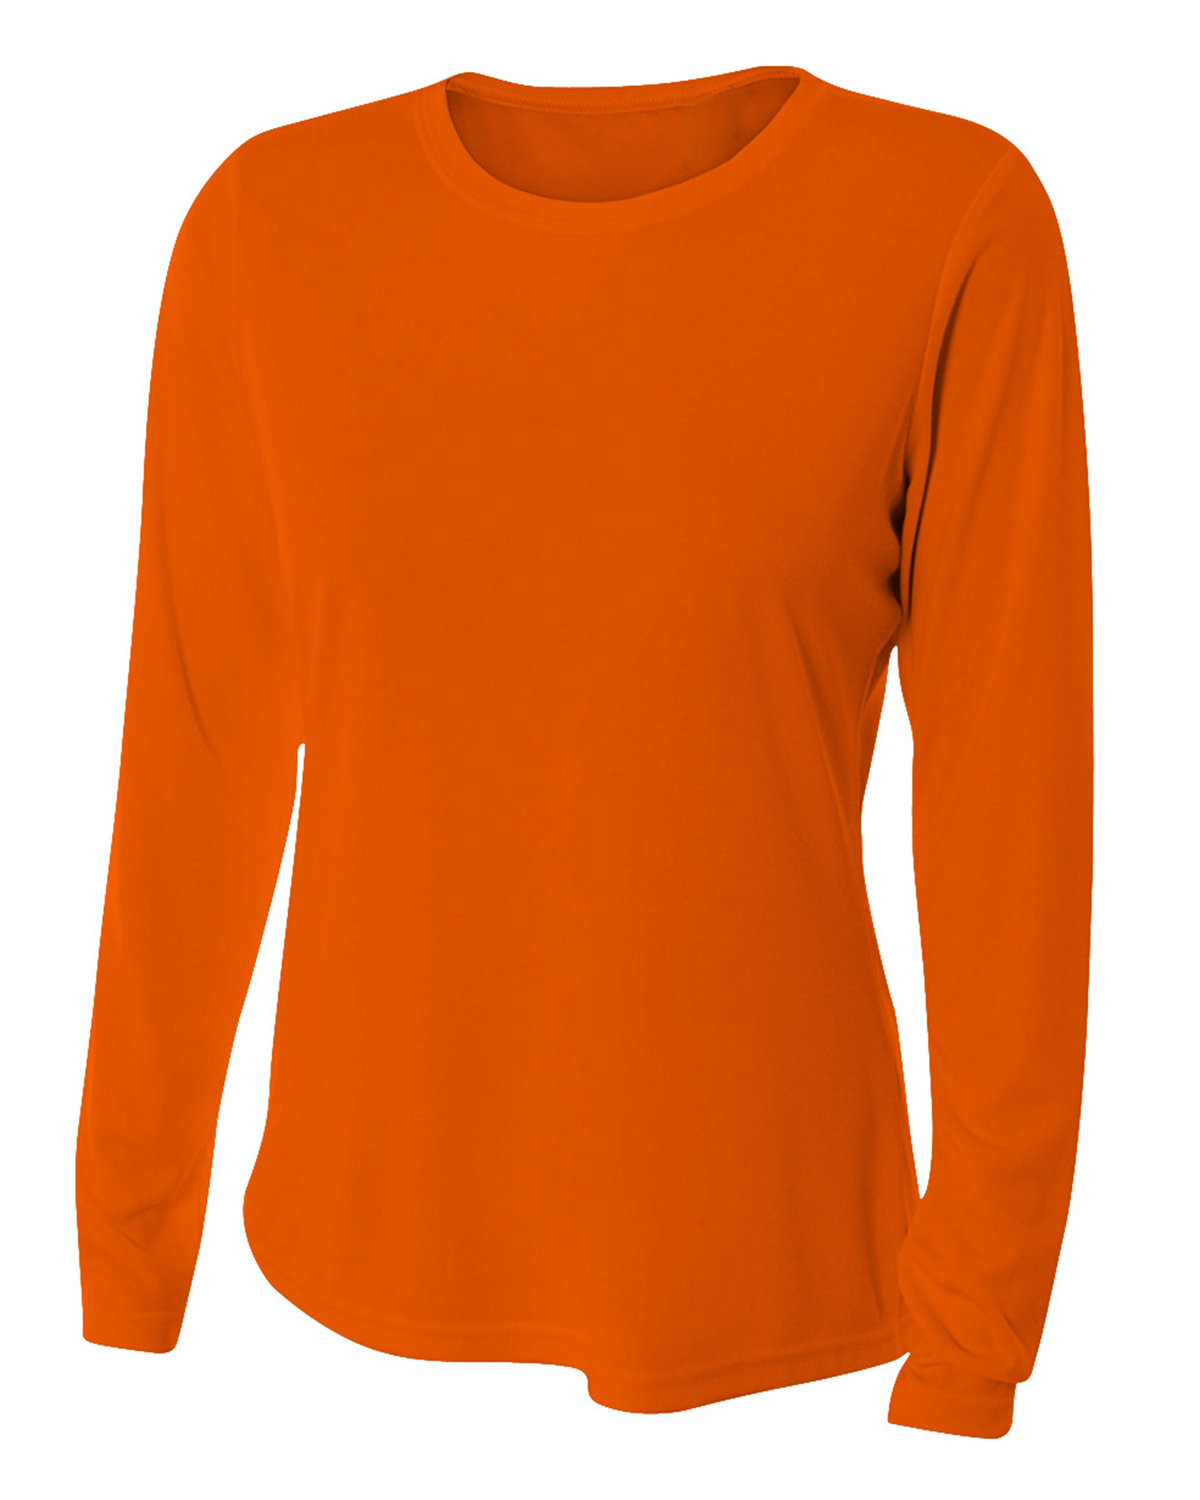 A4 Ladies' Long Sleeve Cooling Performance Crew Shirt SAFETY ORANGE 